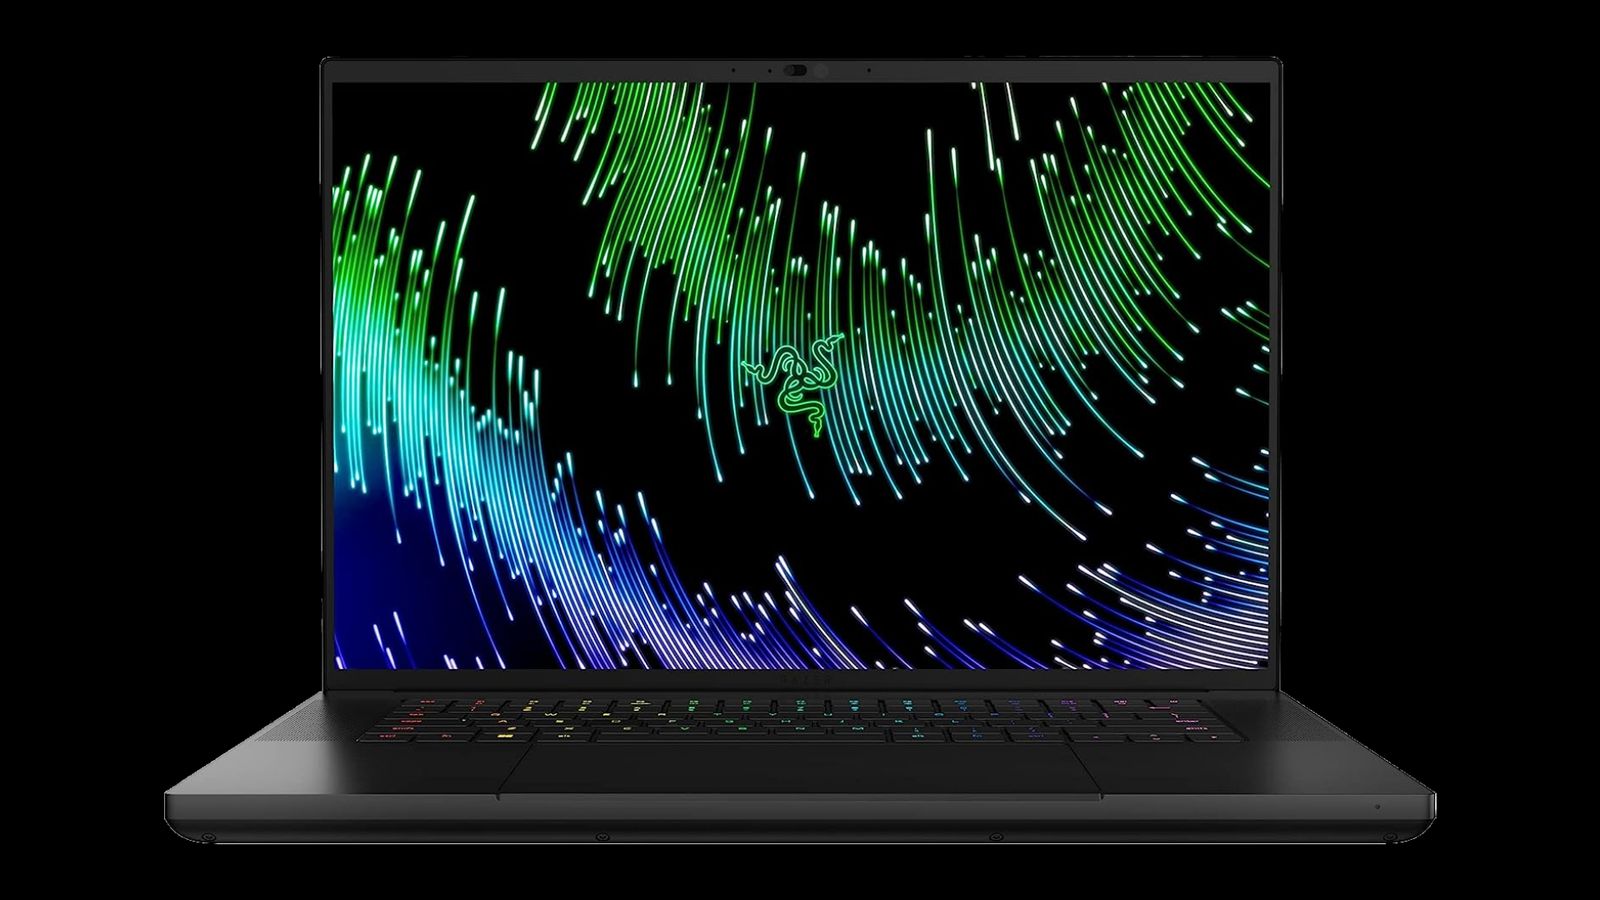 Razer Blade 16 product image of a black gaming laptop featuring a blue and green pattern on the display.